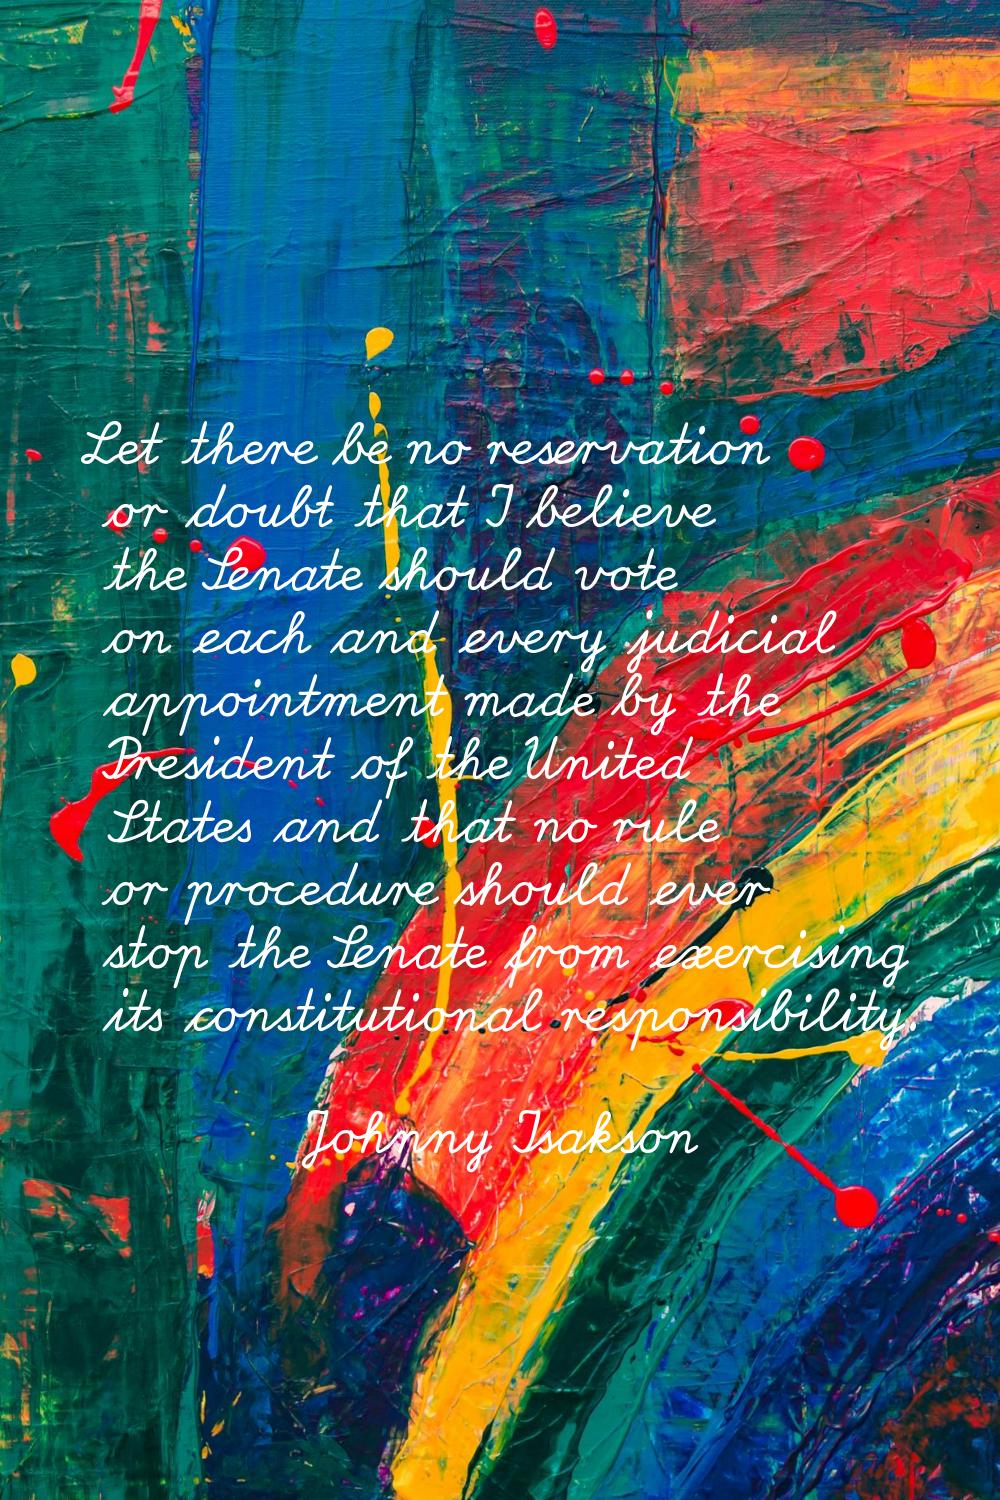 Let there be no reservation or doubt that I believe the Senate should vote on each and every judici